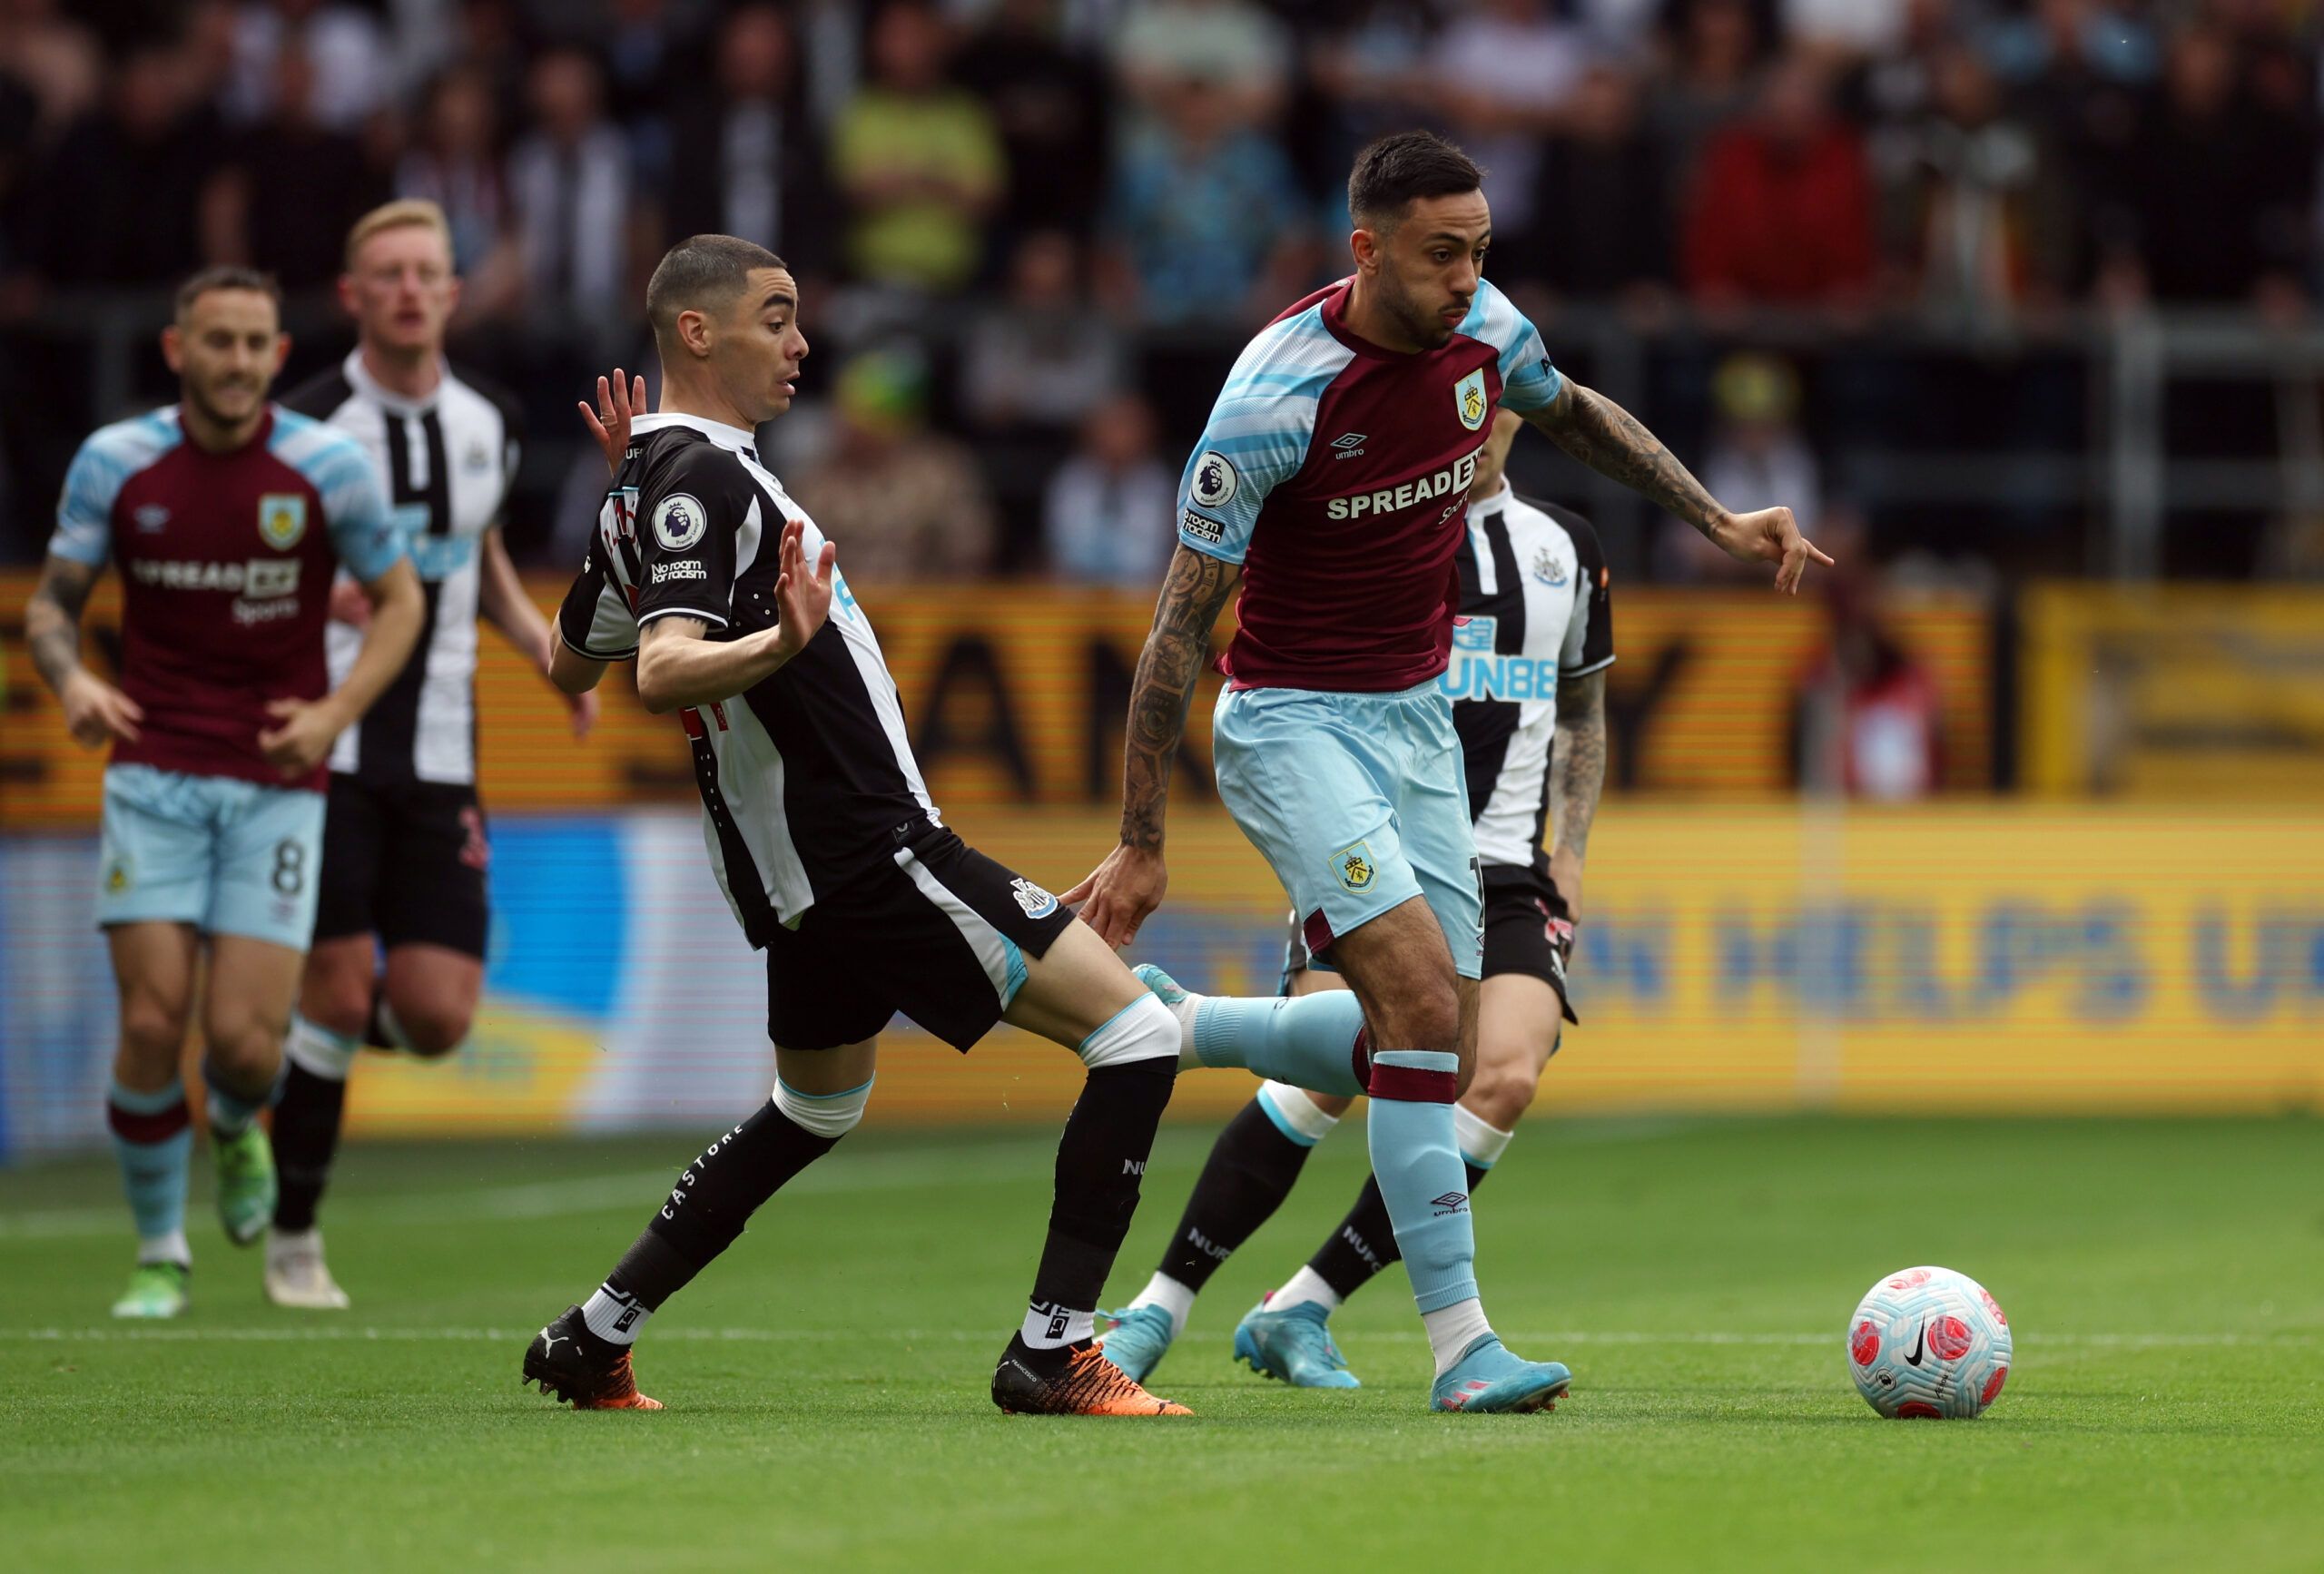 Soccer Football - Premier League - Burnley v Newcastle United - Turf Moor, Burnley, Britain - May 22, 2022 Burnley's Dwight McNeil in action with Newcastle United's Miguel Almiron Action Images via Reuters/Lee Smith EDITORIAL USE ONLY. No use with unauthorized audio, video, data, fixture lists, club/league logos or 'live' services. Online in-match use limited to 75 images, no video emulation. No use in betting, games or single club /league/player publications.  Please contact your account repres